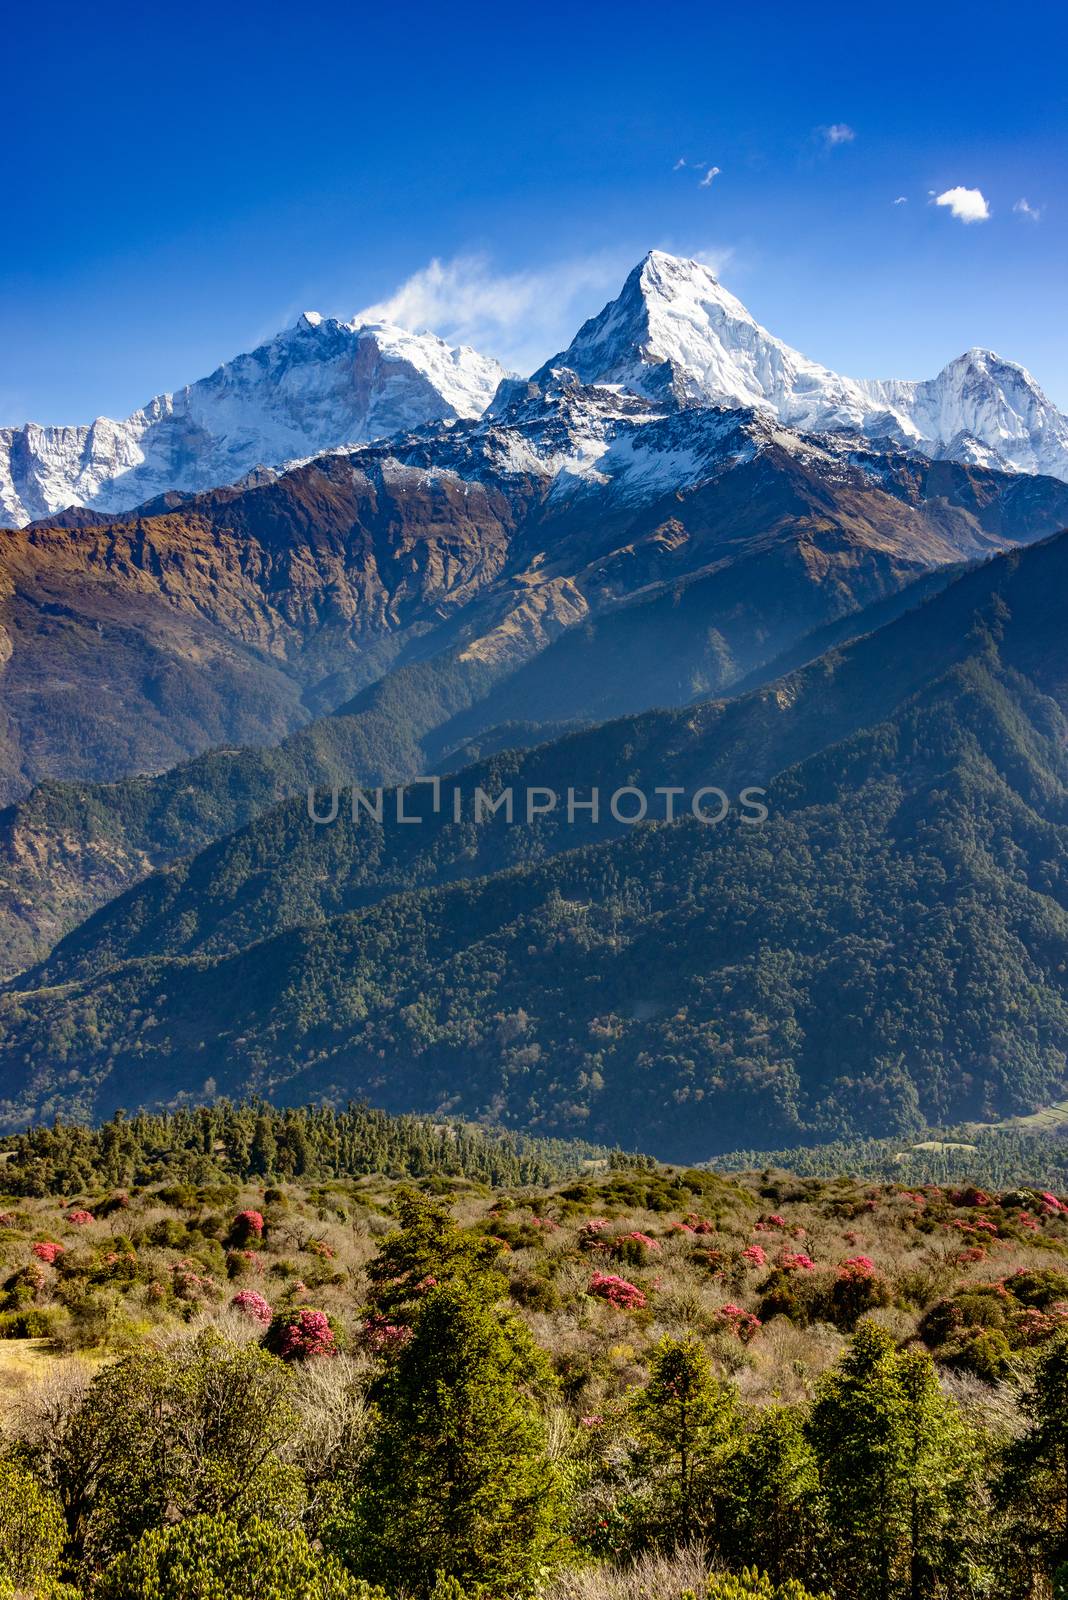 The Annapurna South in Nepal by dutourdumonde